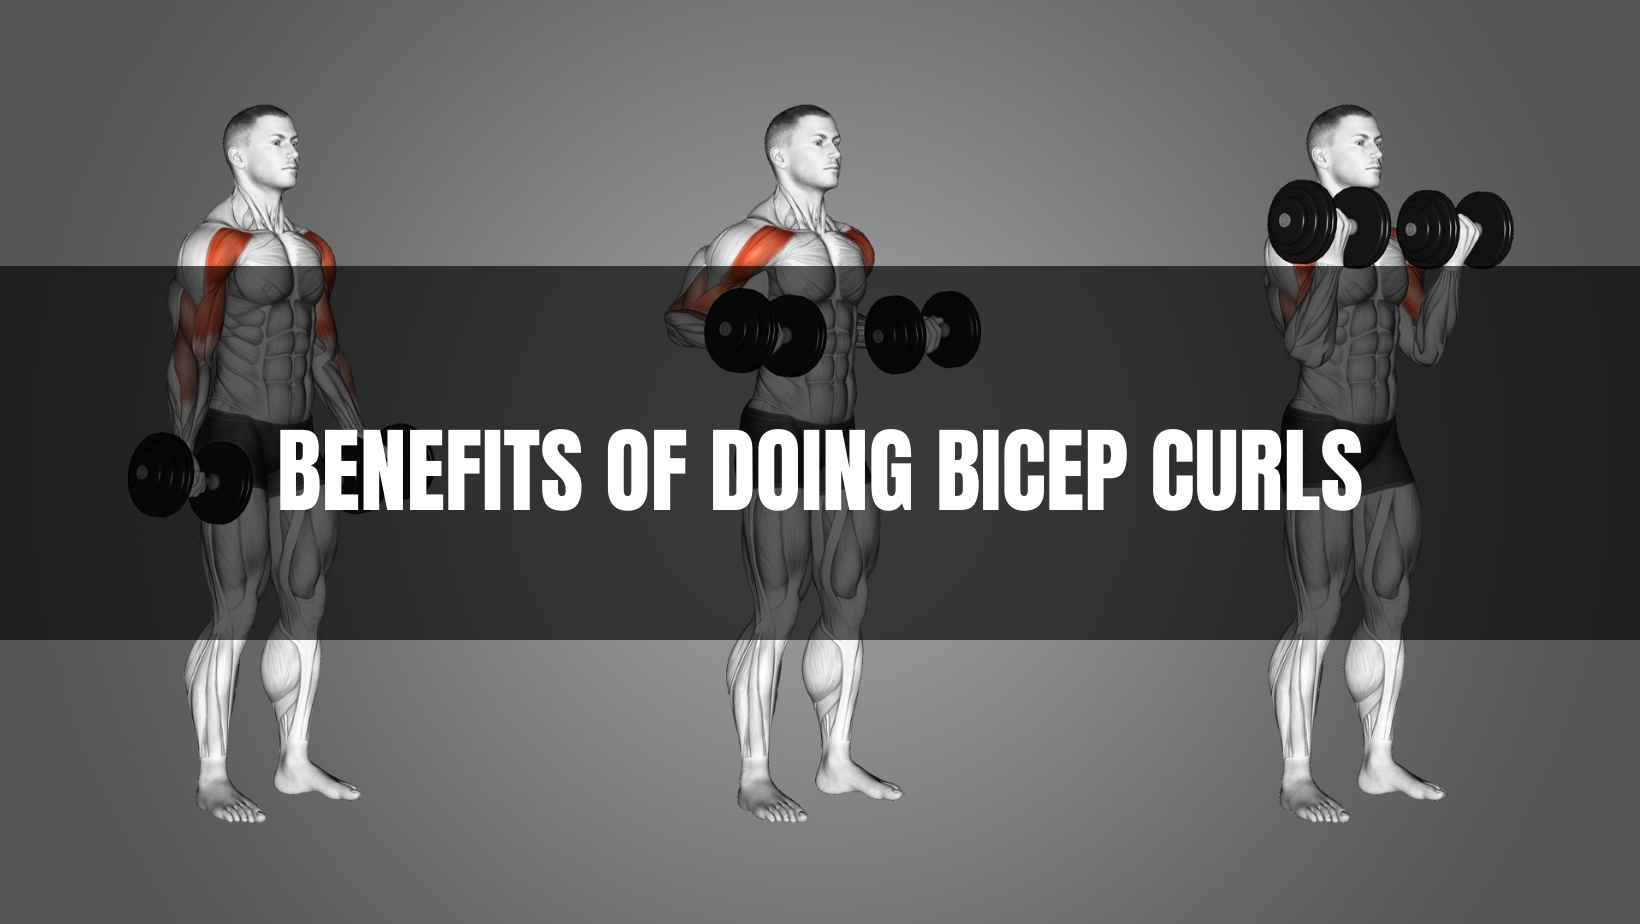 Benefits of Doing Bicep Curls